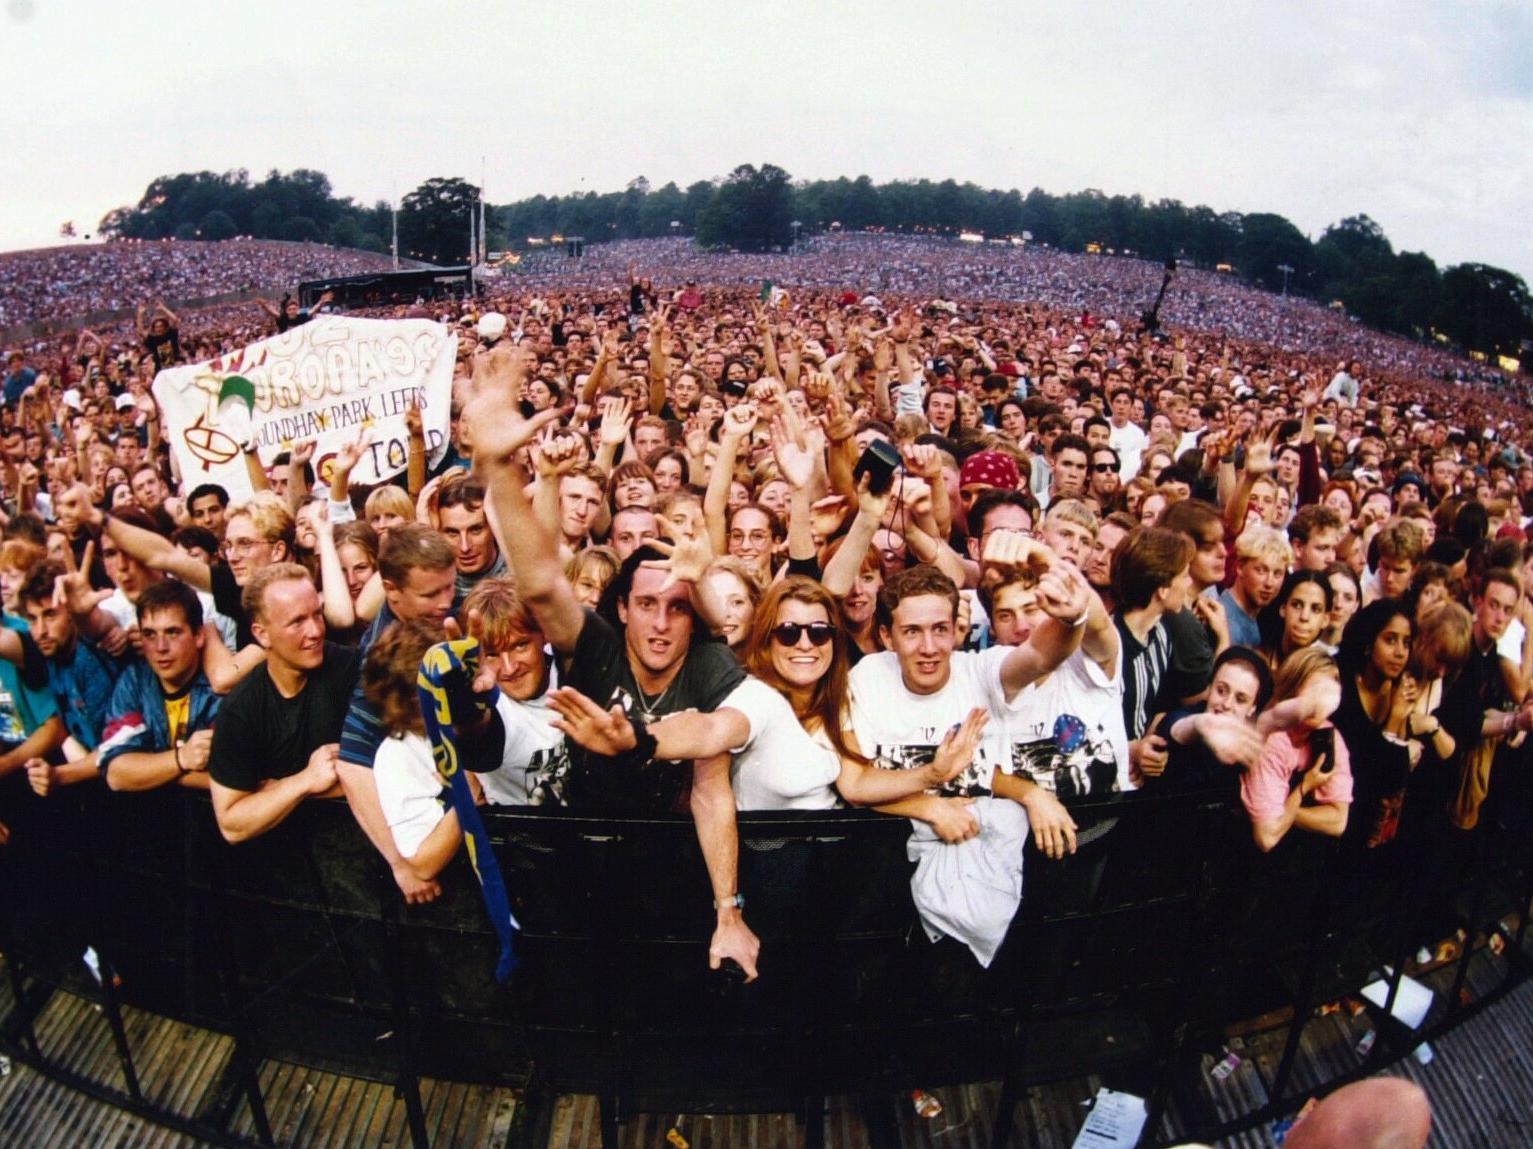 Were you among the crowd at Roundhay Park to watch U2?